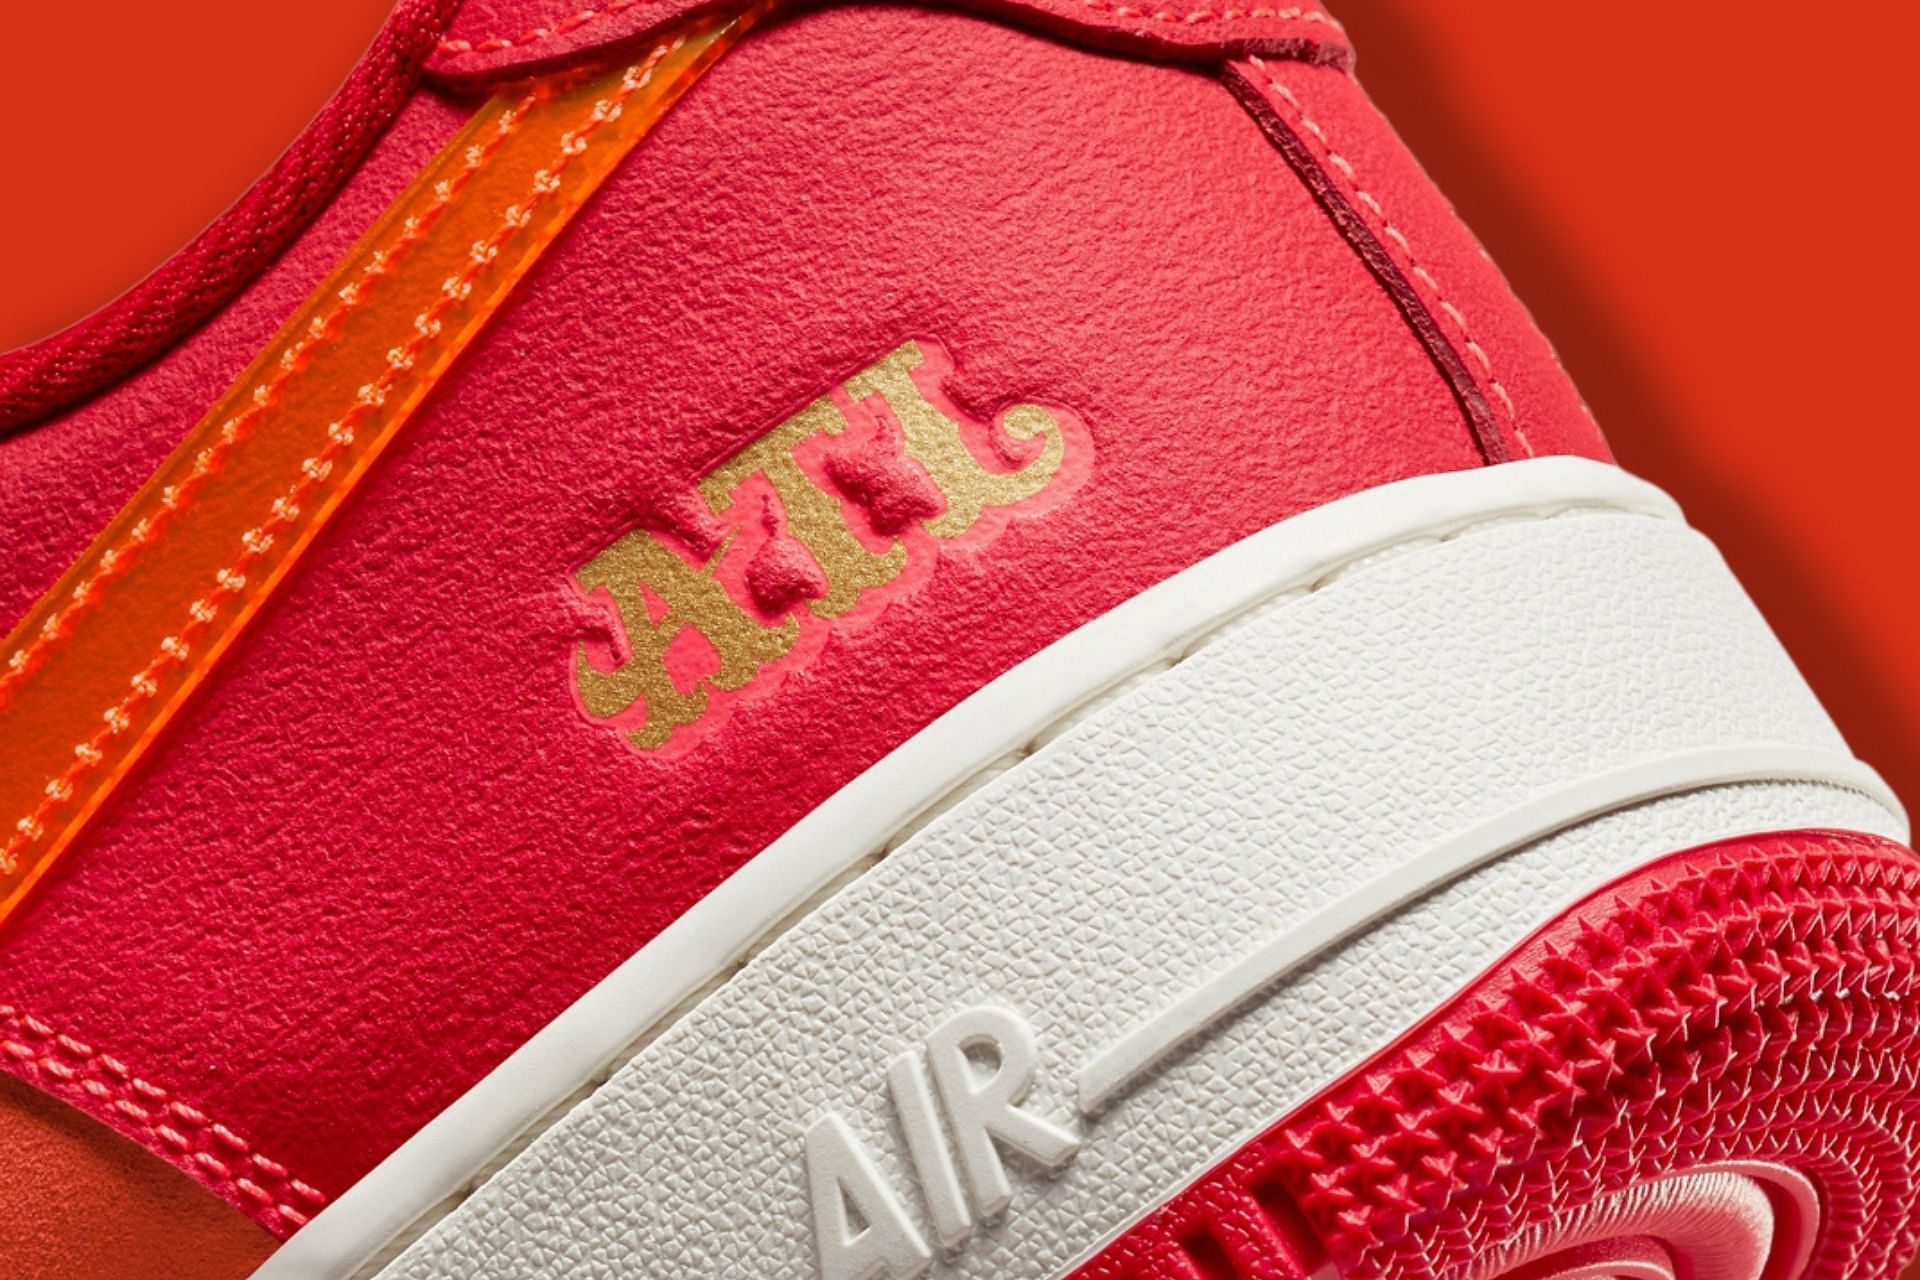 Take a closer look at the ATL embellishment placed around the heel counter (Image via Sole Retriever)